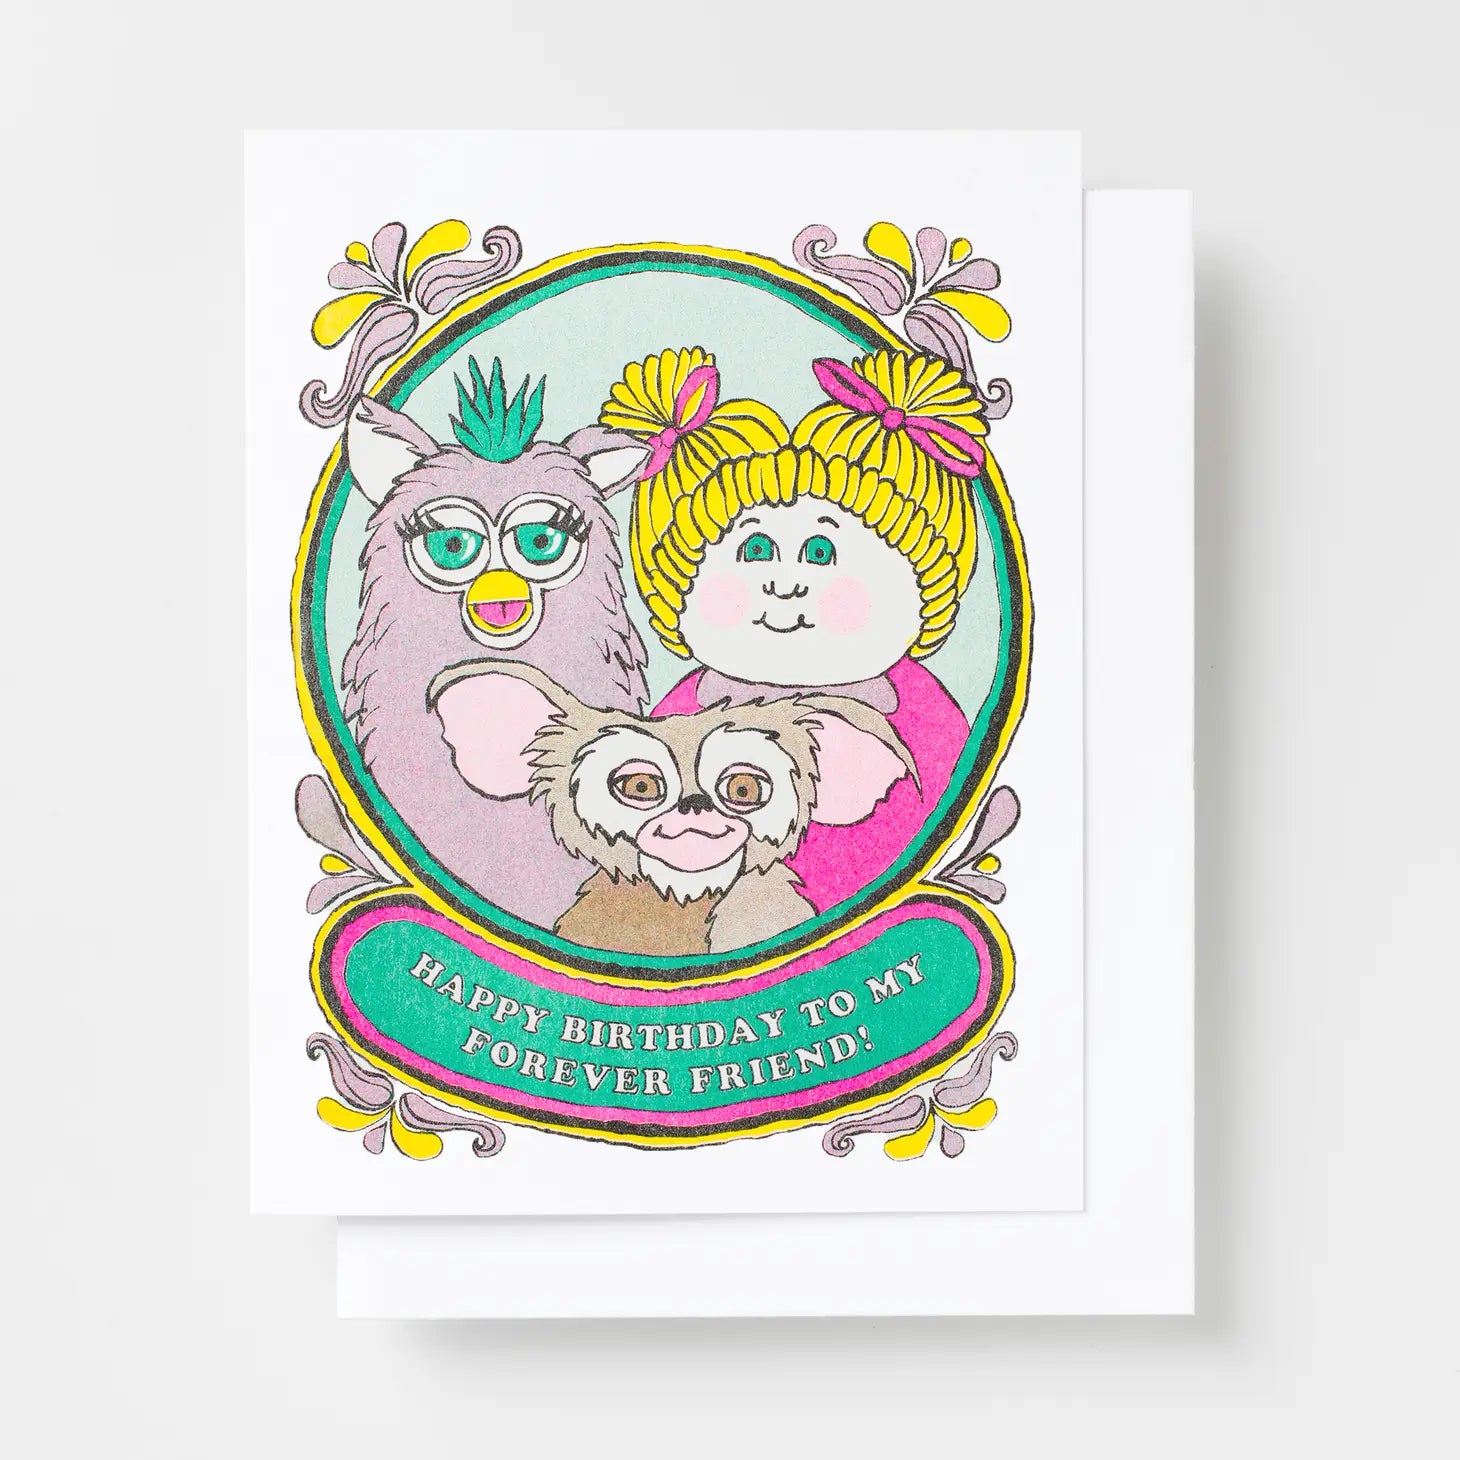 Bday Forever Friend - Greeting Card